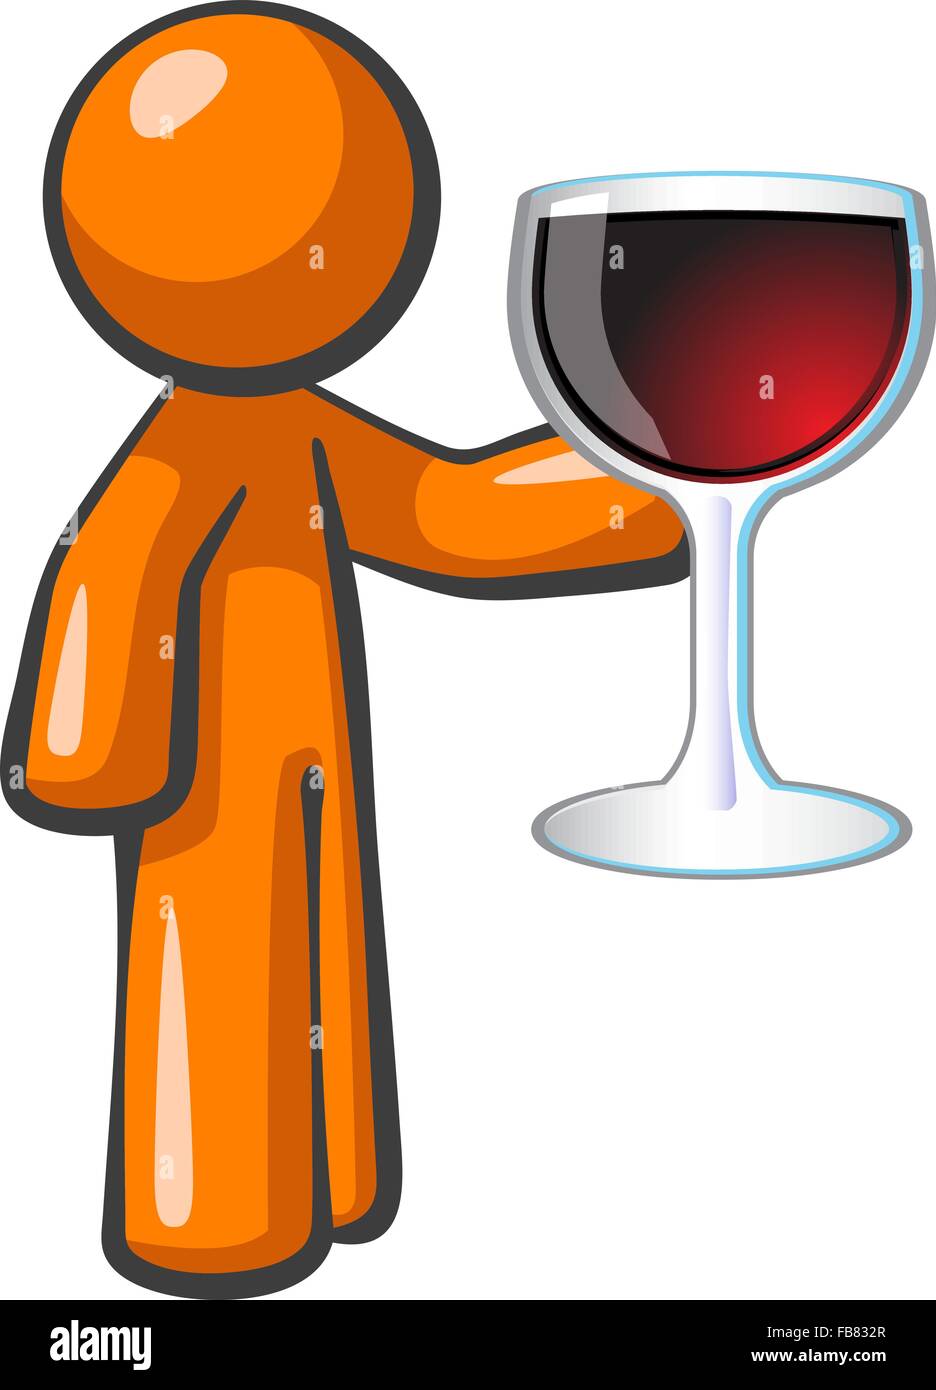 Orange man holding a glass of fine red wine, and a keg behind him, suggesting he may be in a wine cellar. Illustration to depict. Stock Vector